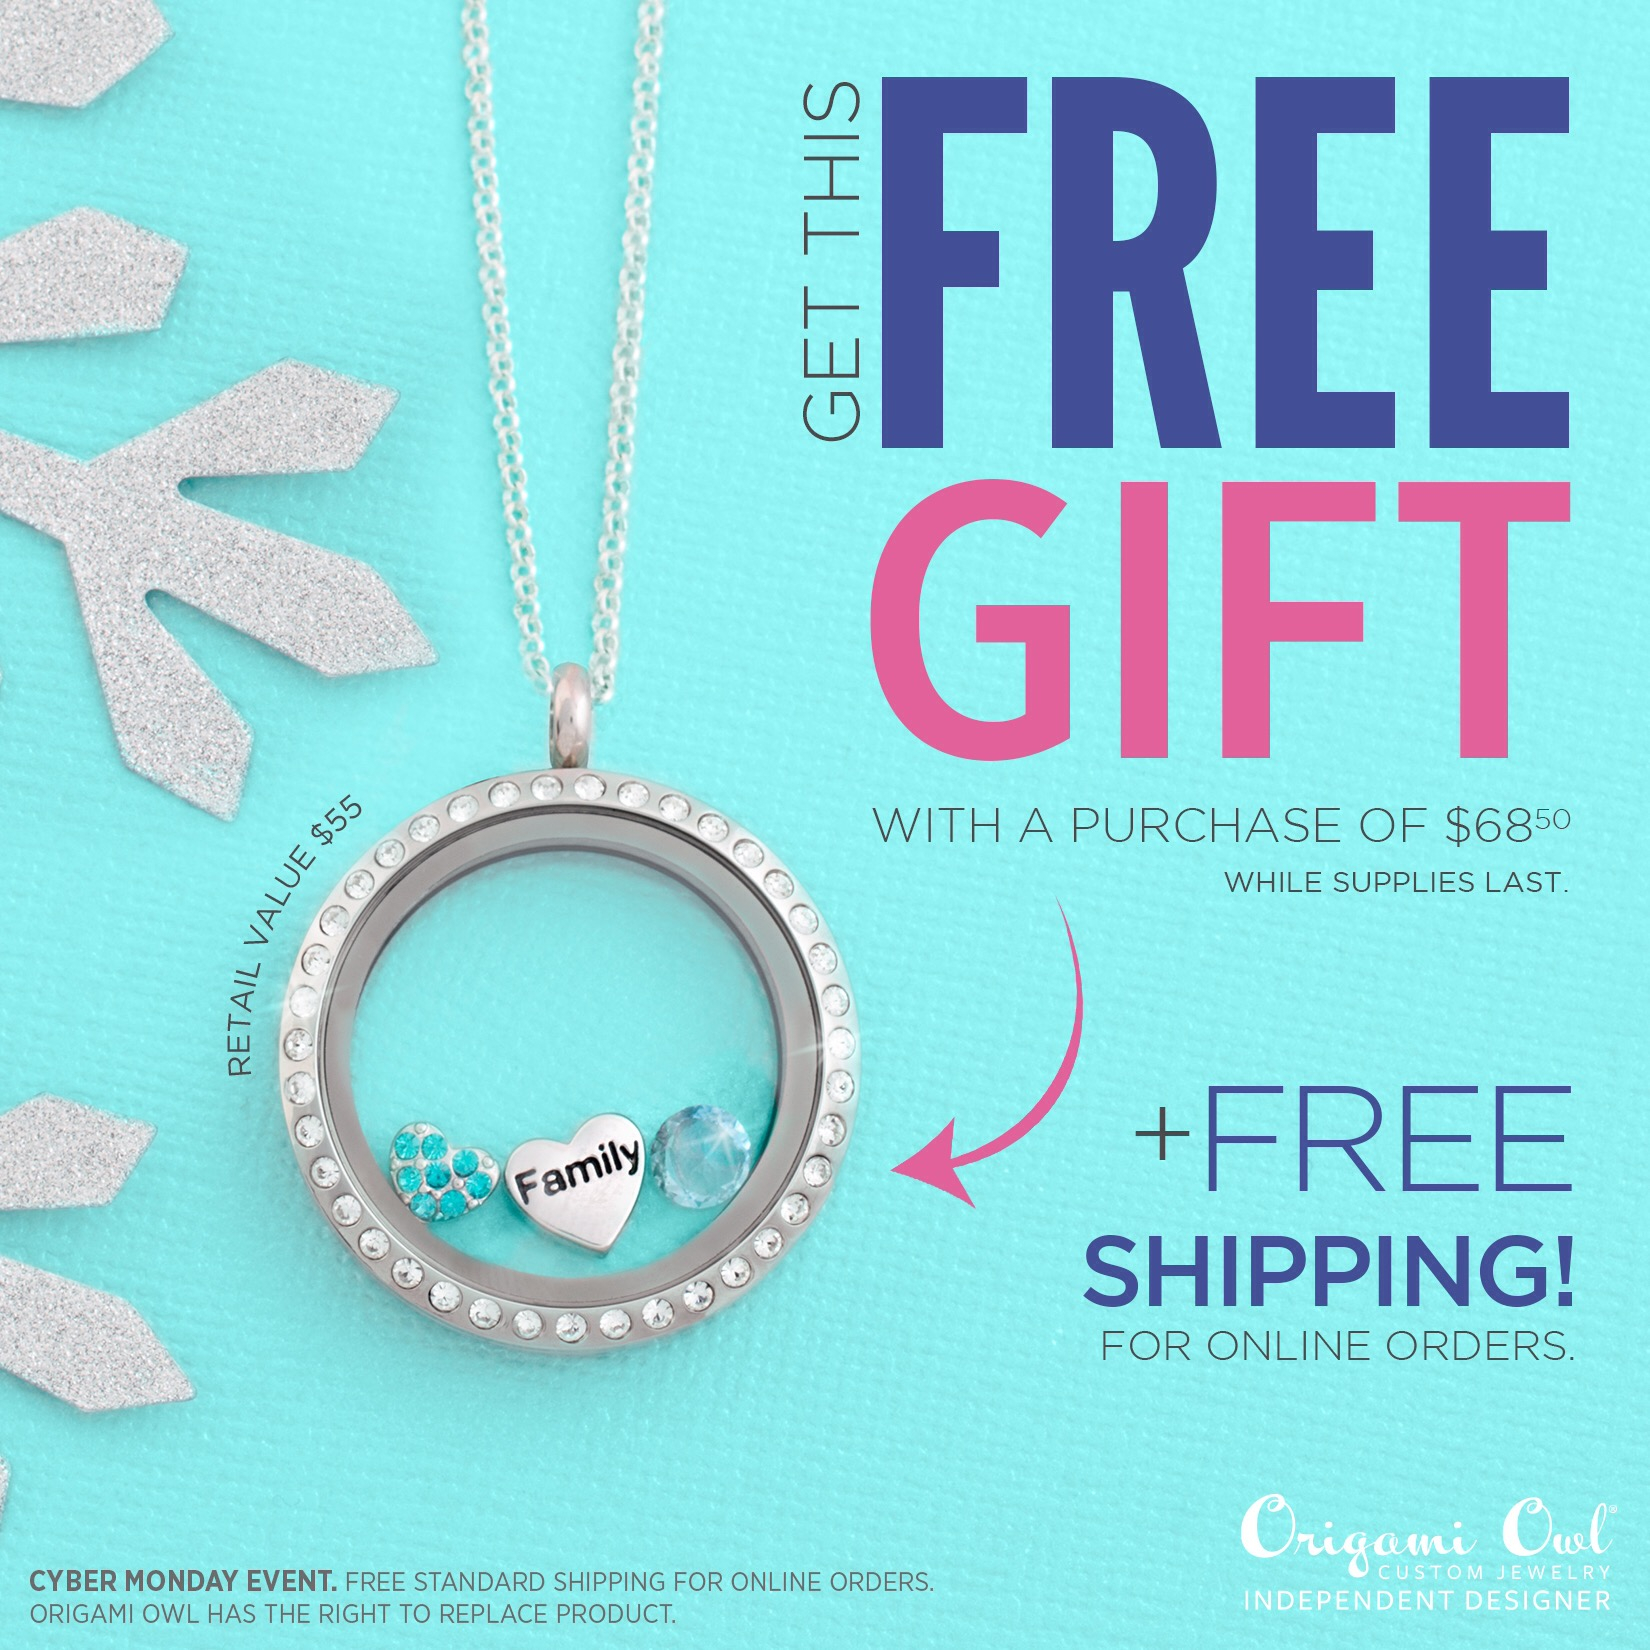 Coupons For Origami Owl Origami Owl Coupon Code December 2018 Sinful Colors Coupons